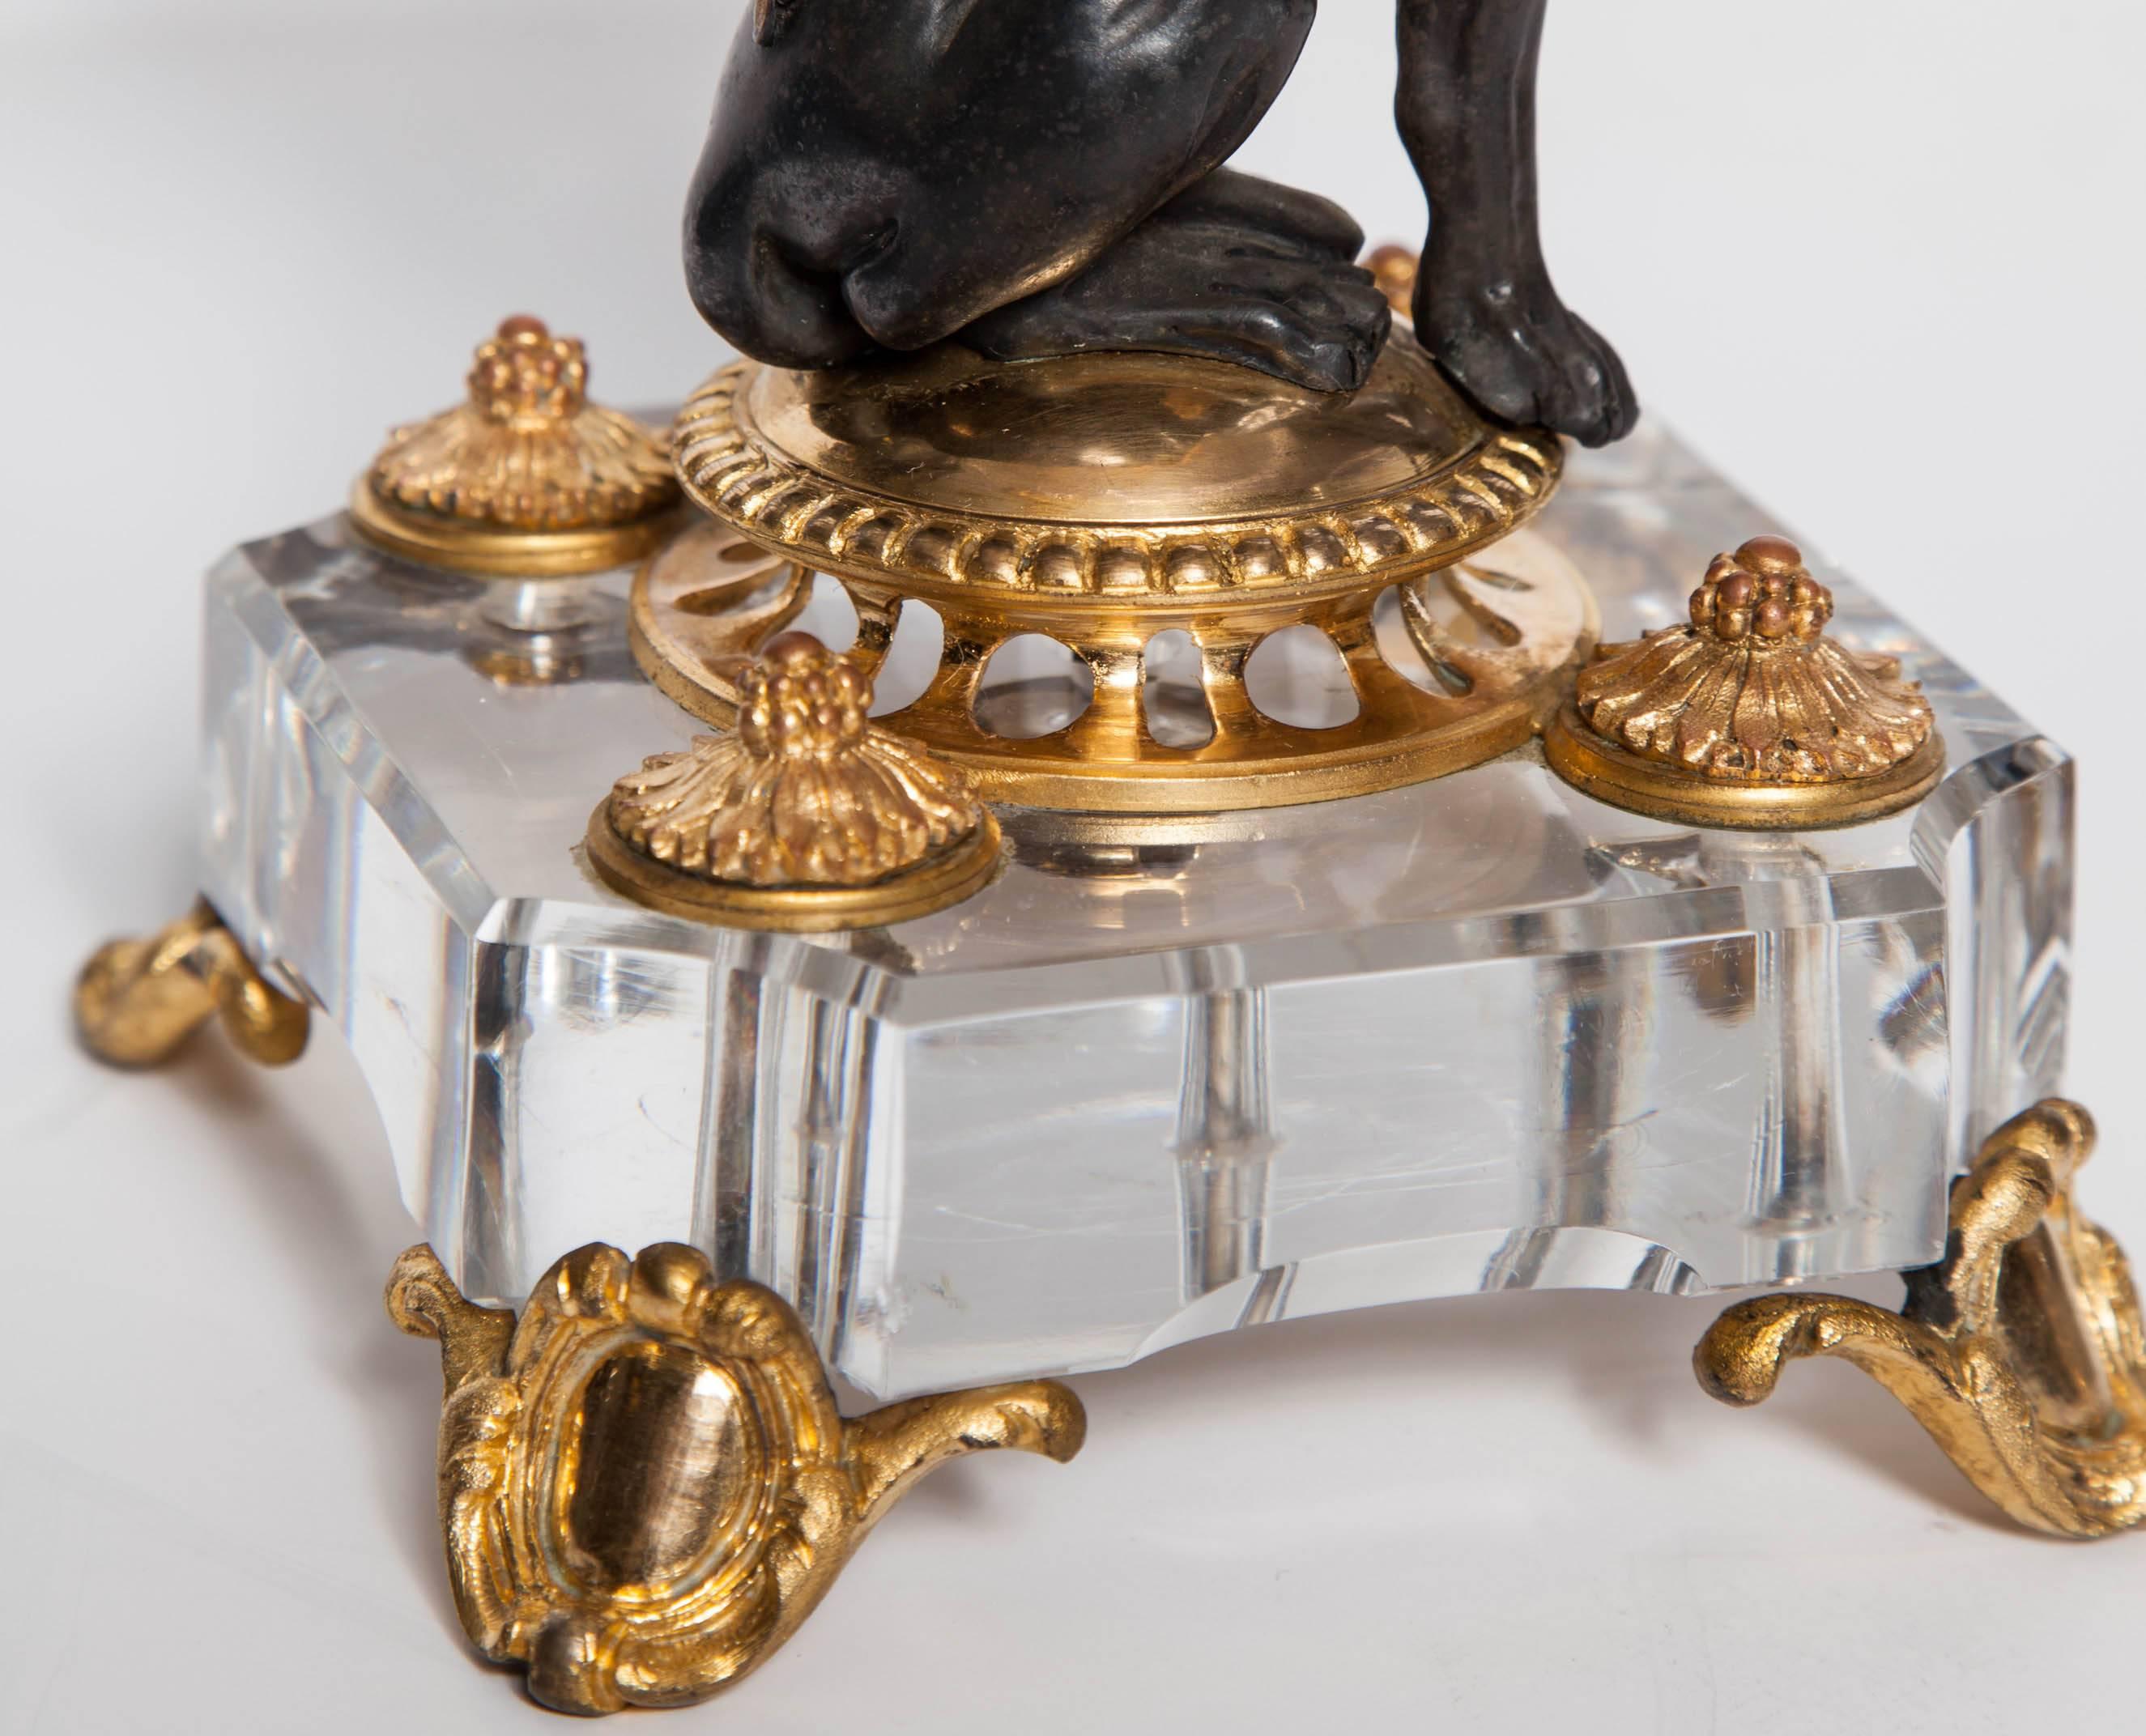 An exceptional pair of antique French signed Baccarat hand diamond cut crystal and two-tone; patinated and doré bronze mounted compotes. Each with a posing bronze lion seated on a square shaped cut crystal pillow, resting on each head an original